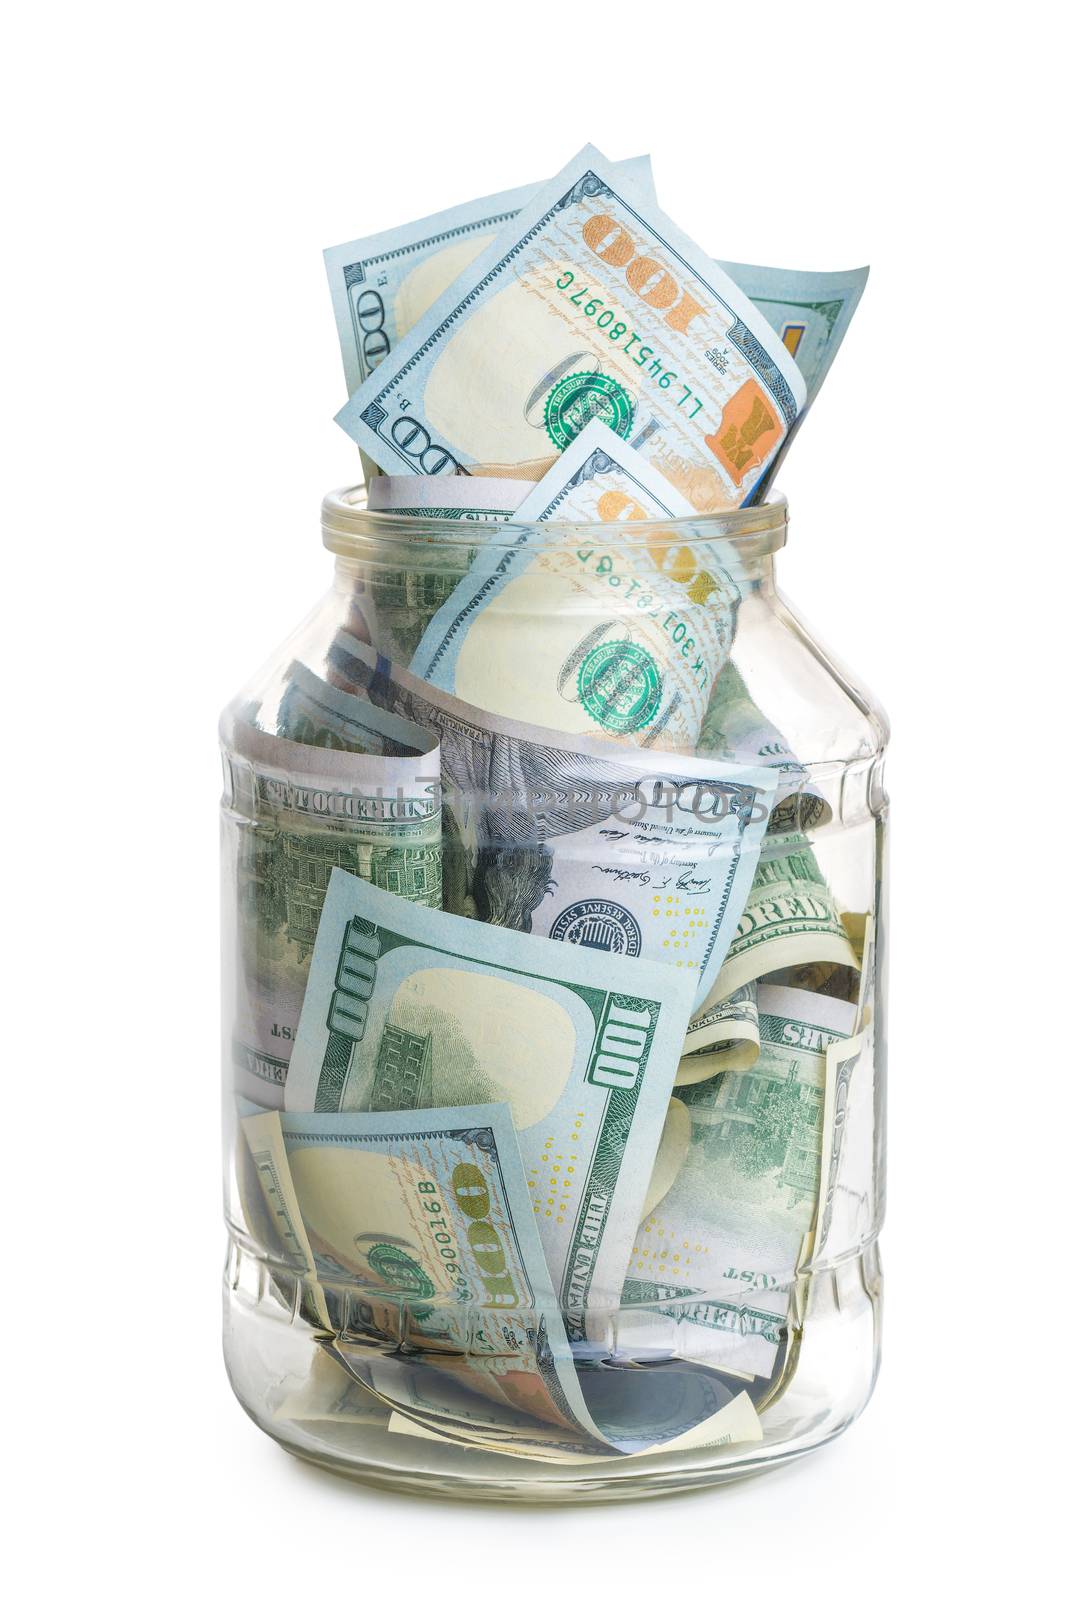 concept photo savings - a glass jar filled with 100 dollar bills by kosmsos111